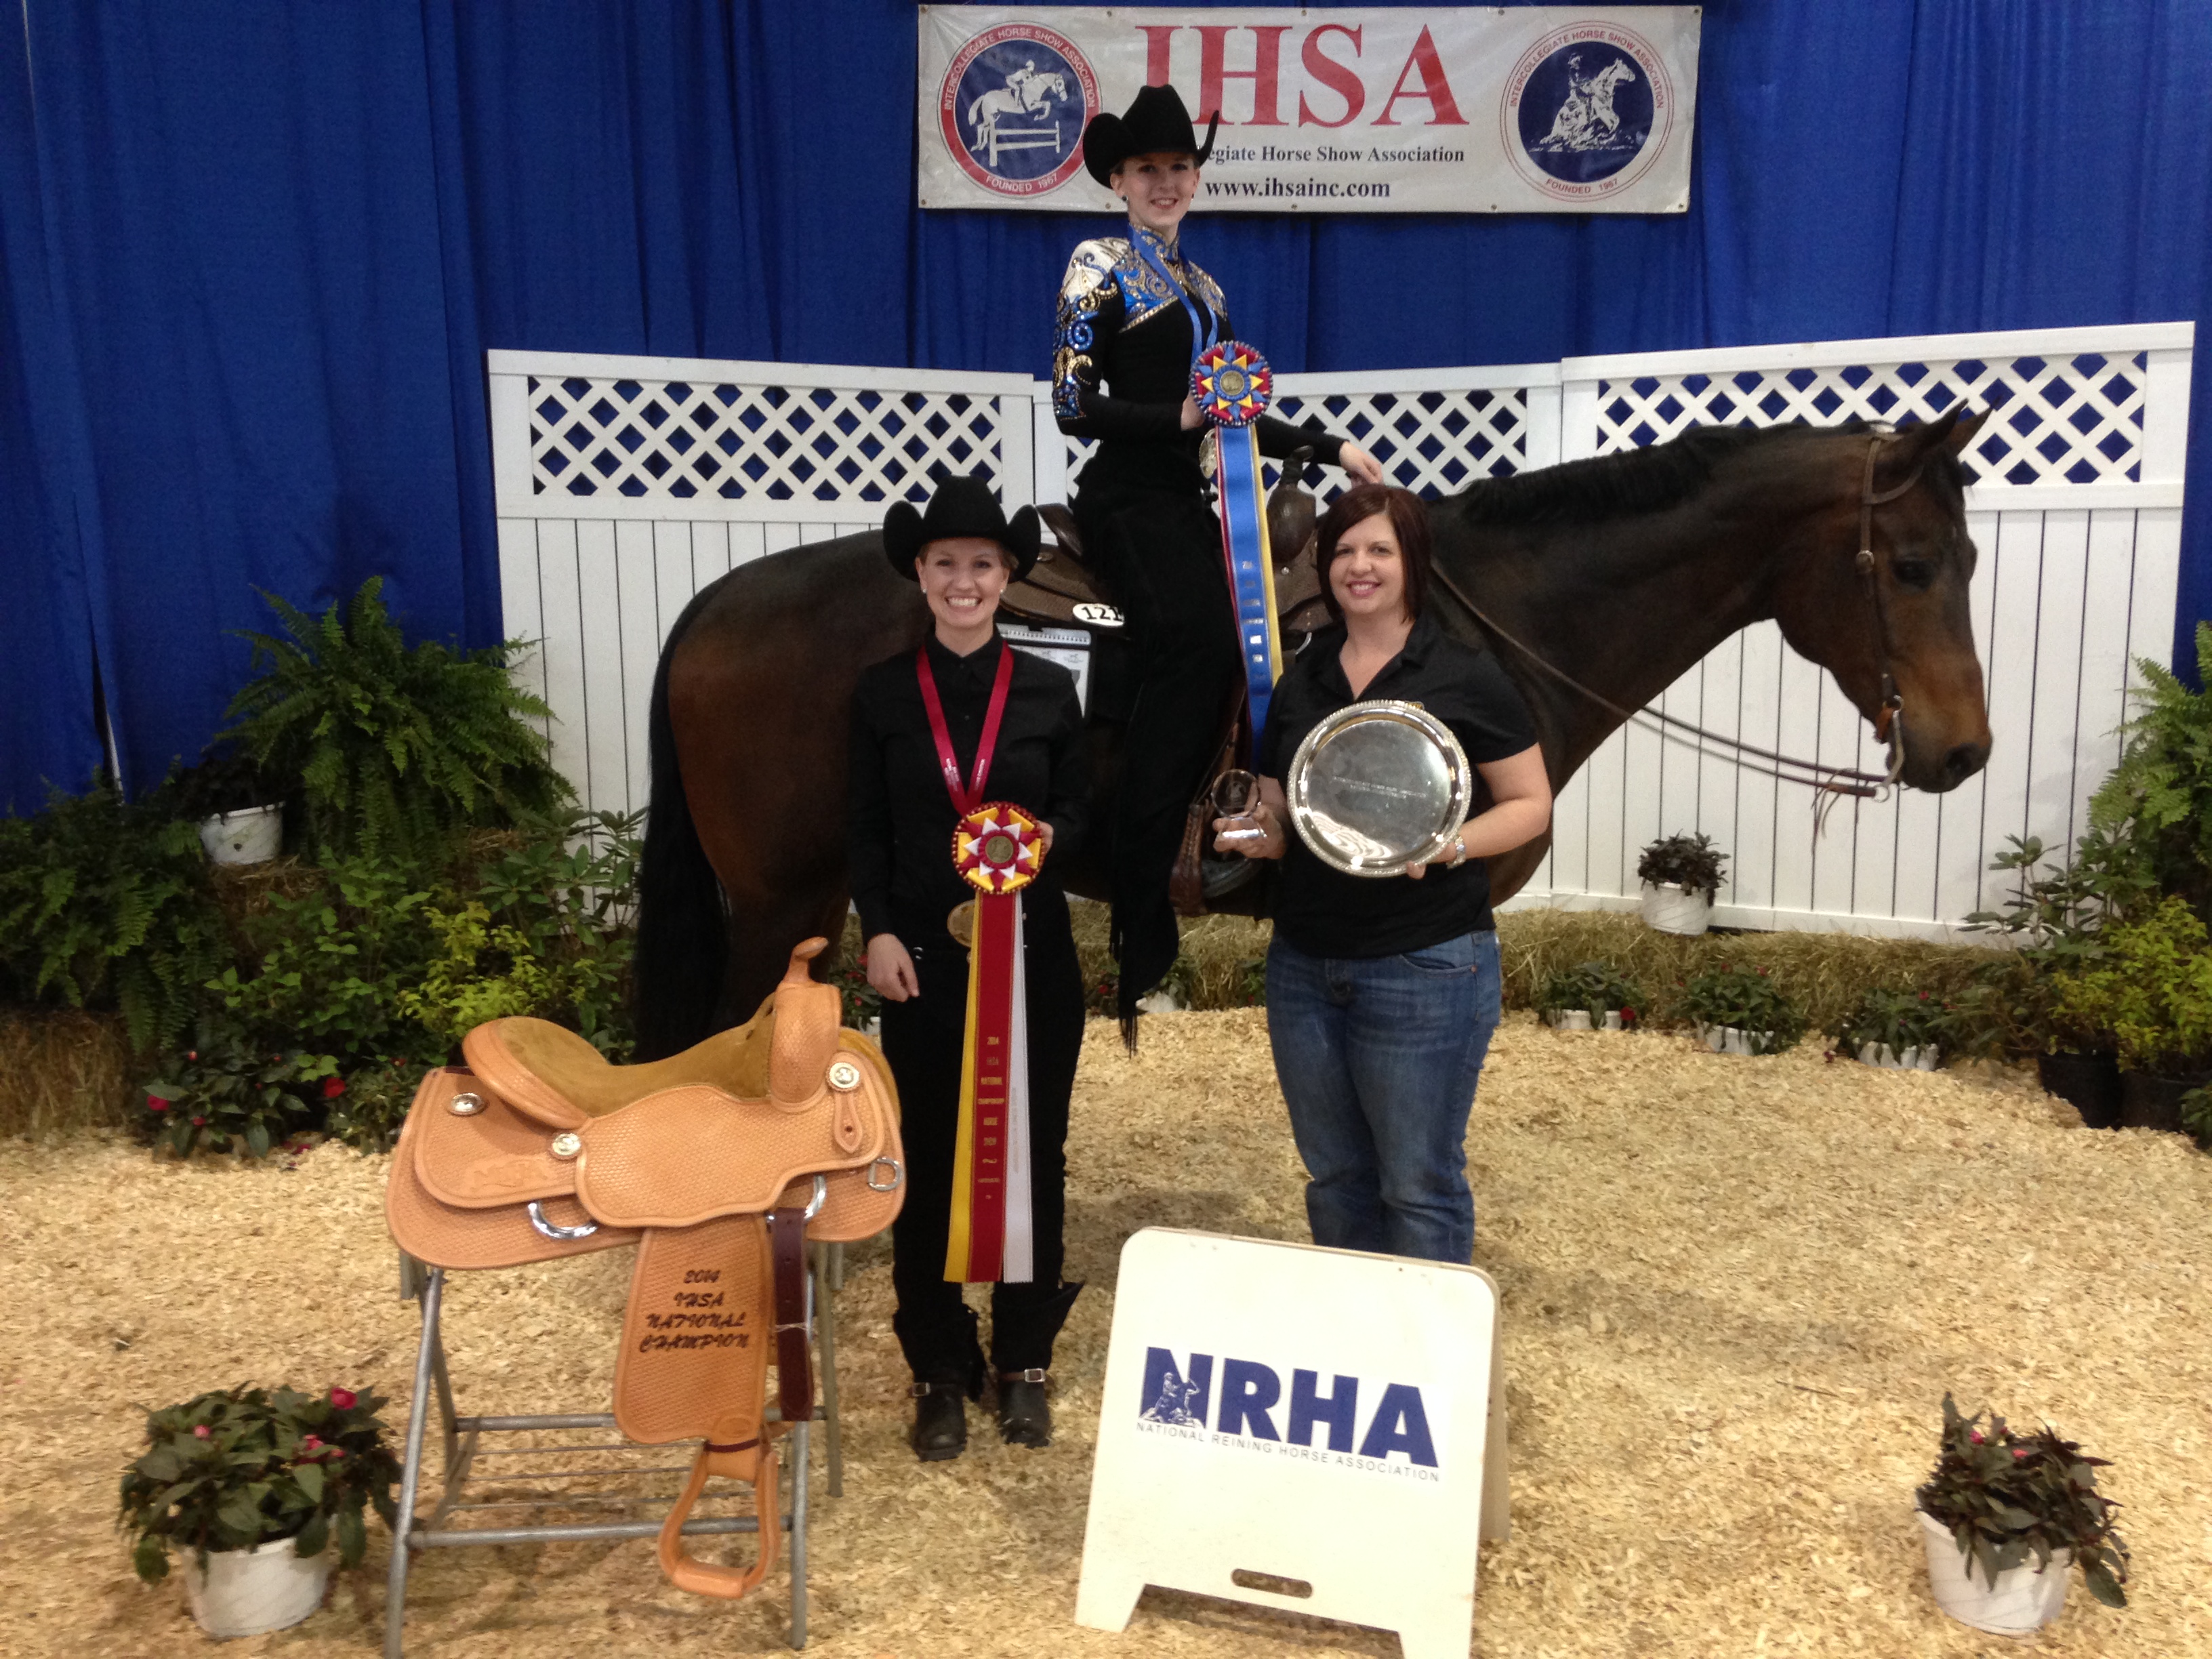 NDSU Western equestrian team members Hailey Aagard (on horseback) and Janna Rice (left), along with their coach, Tara Swanson, display the ribbons and other items they earned at the Intercollegiate Horse Show Association's National Championships in Harrisburg, Pa.